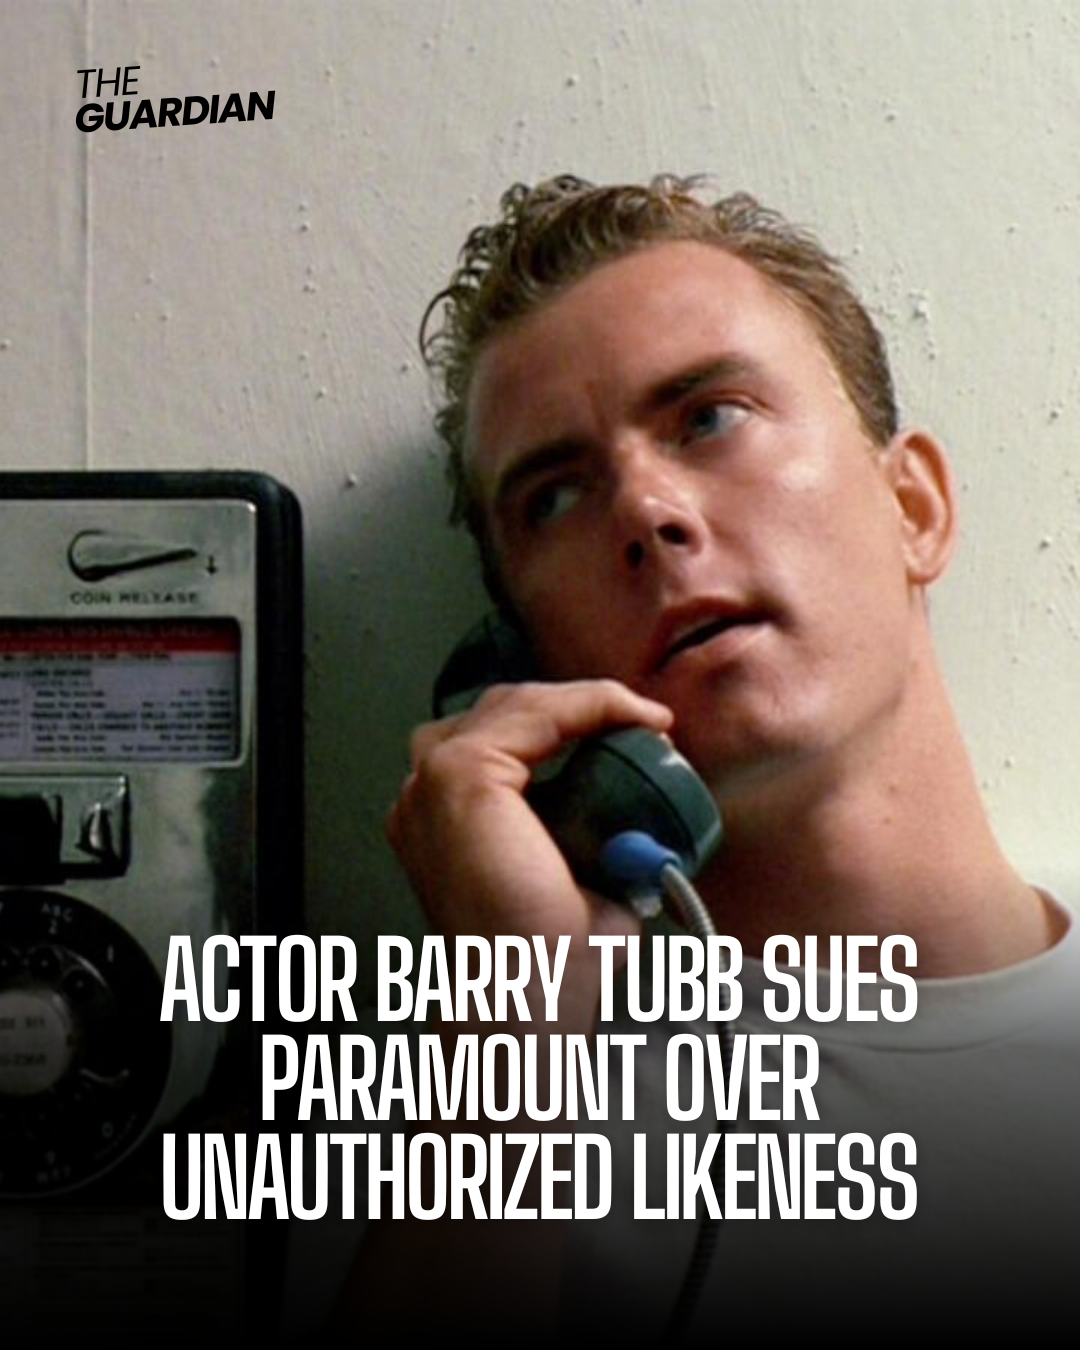 Barry Tubb has sued Paramount Pictures for the unauthorised use of his likeness.